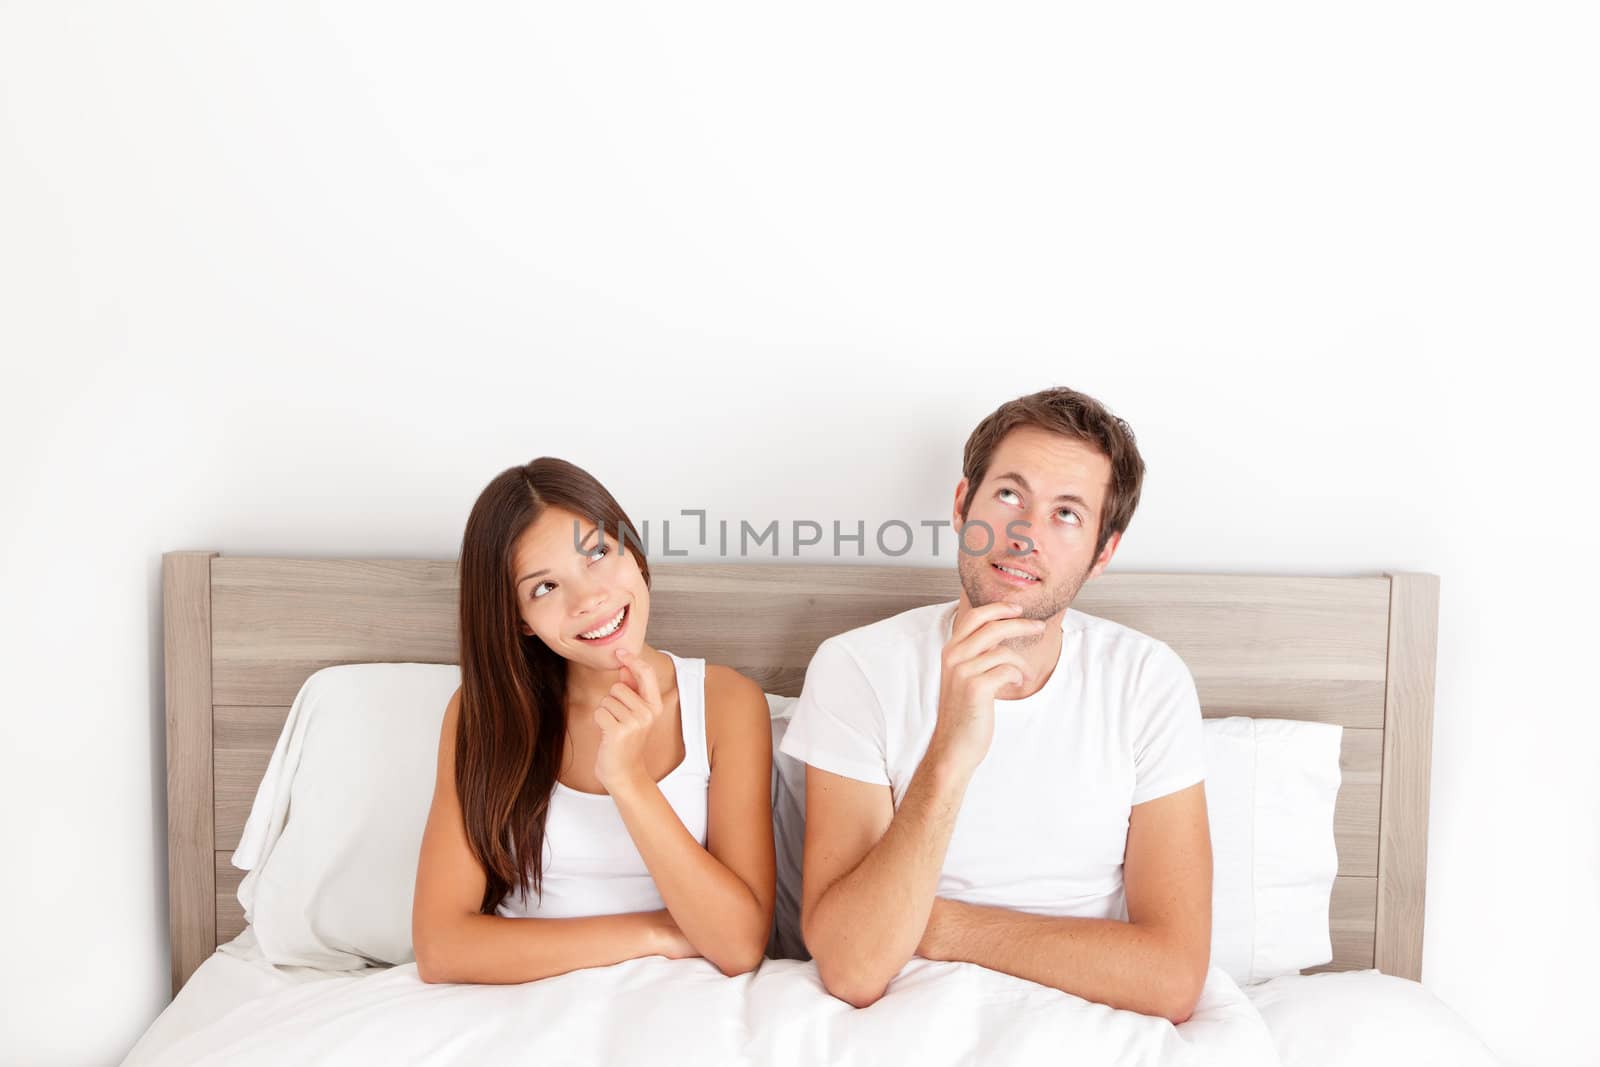 Thinking young couple sitting pensive in bed smiling and looking up at the ceiling for inspiration and ideas. Happy young interracial couple, Asian woman, Caucasian man.